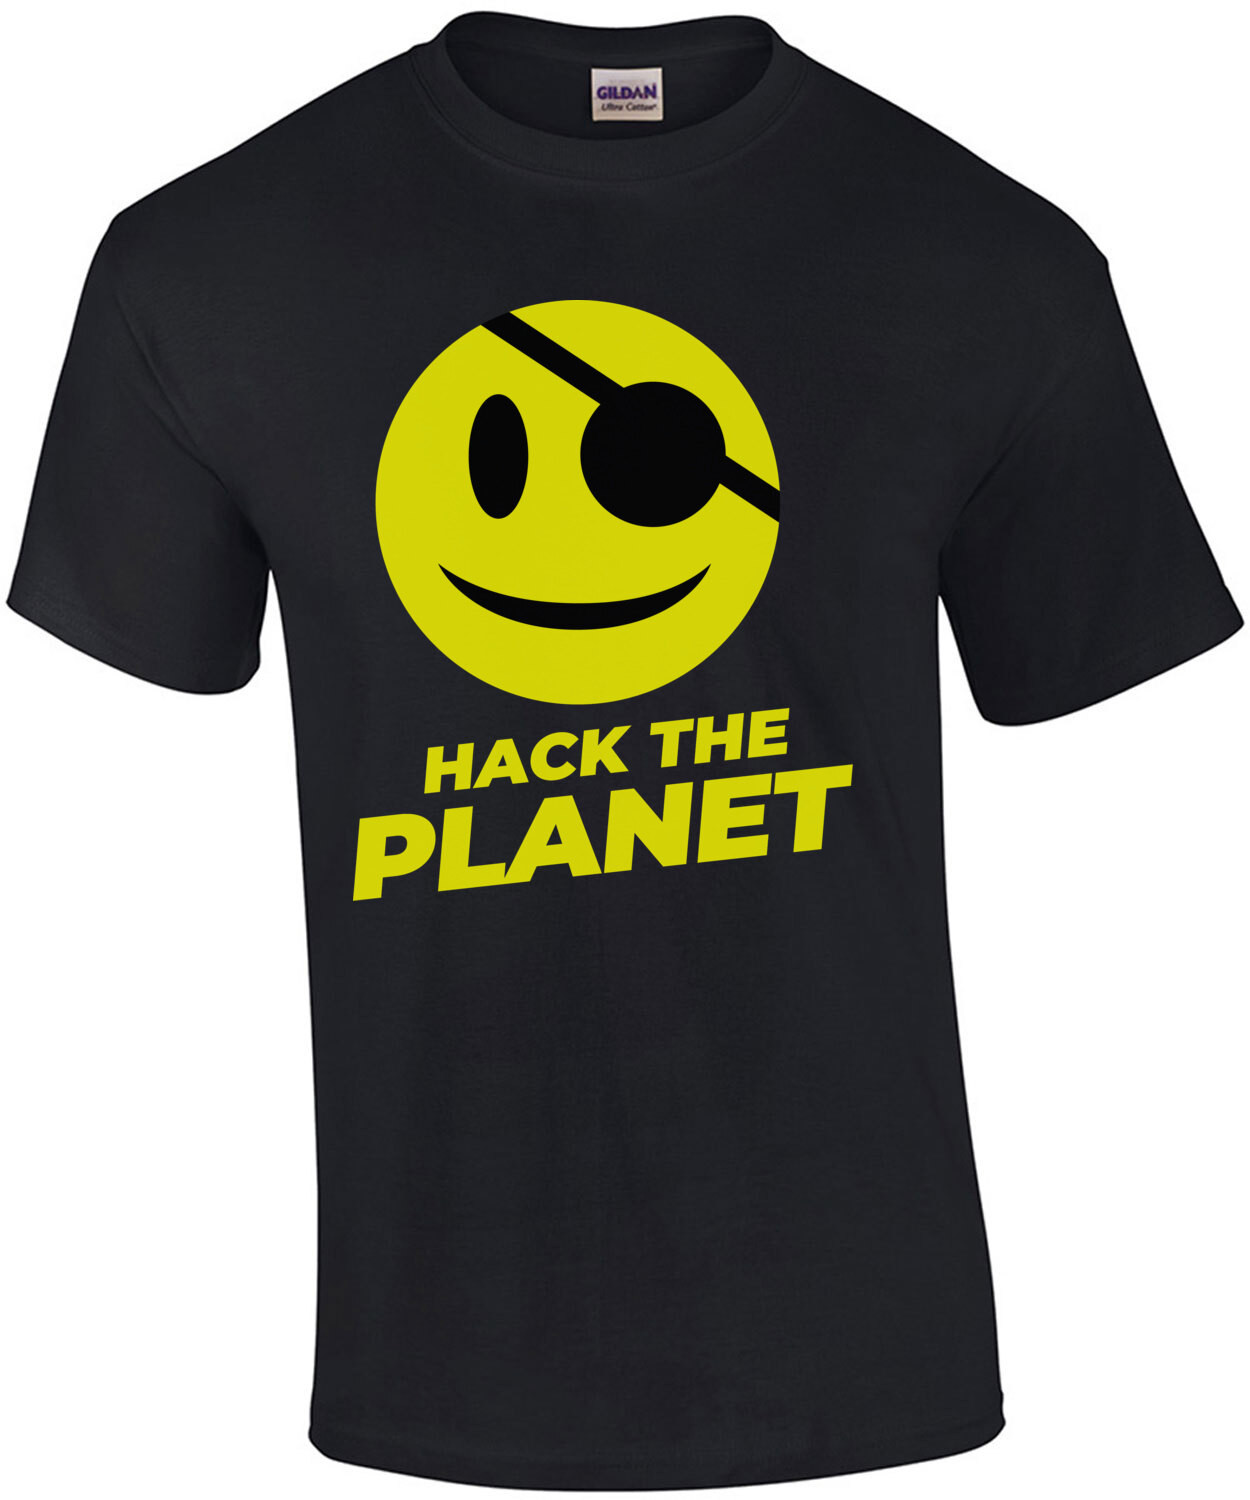 Hack the planet - Hackers - 90's T-Shirt